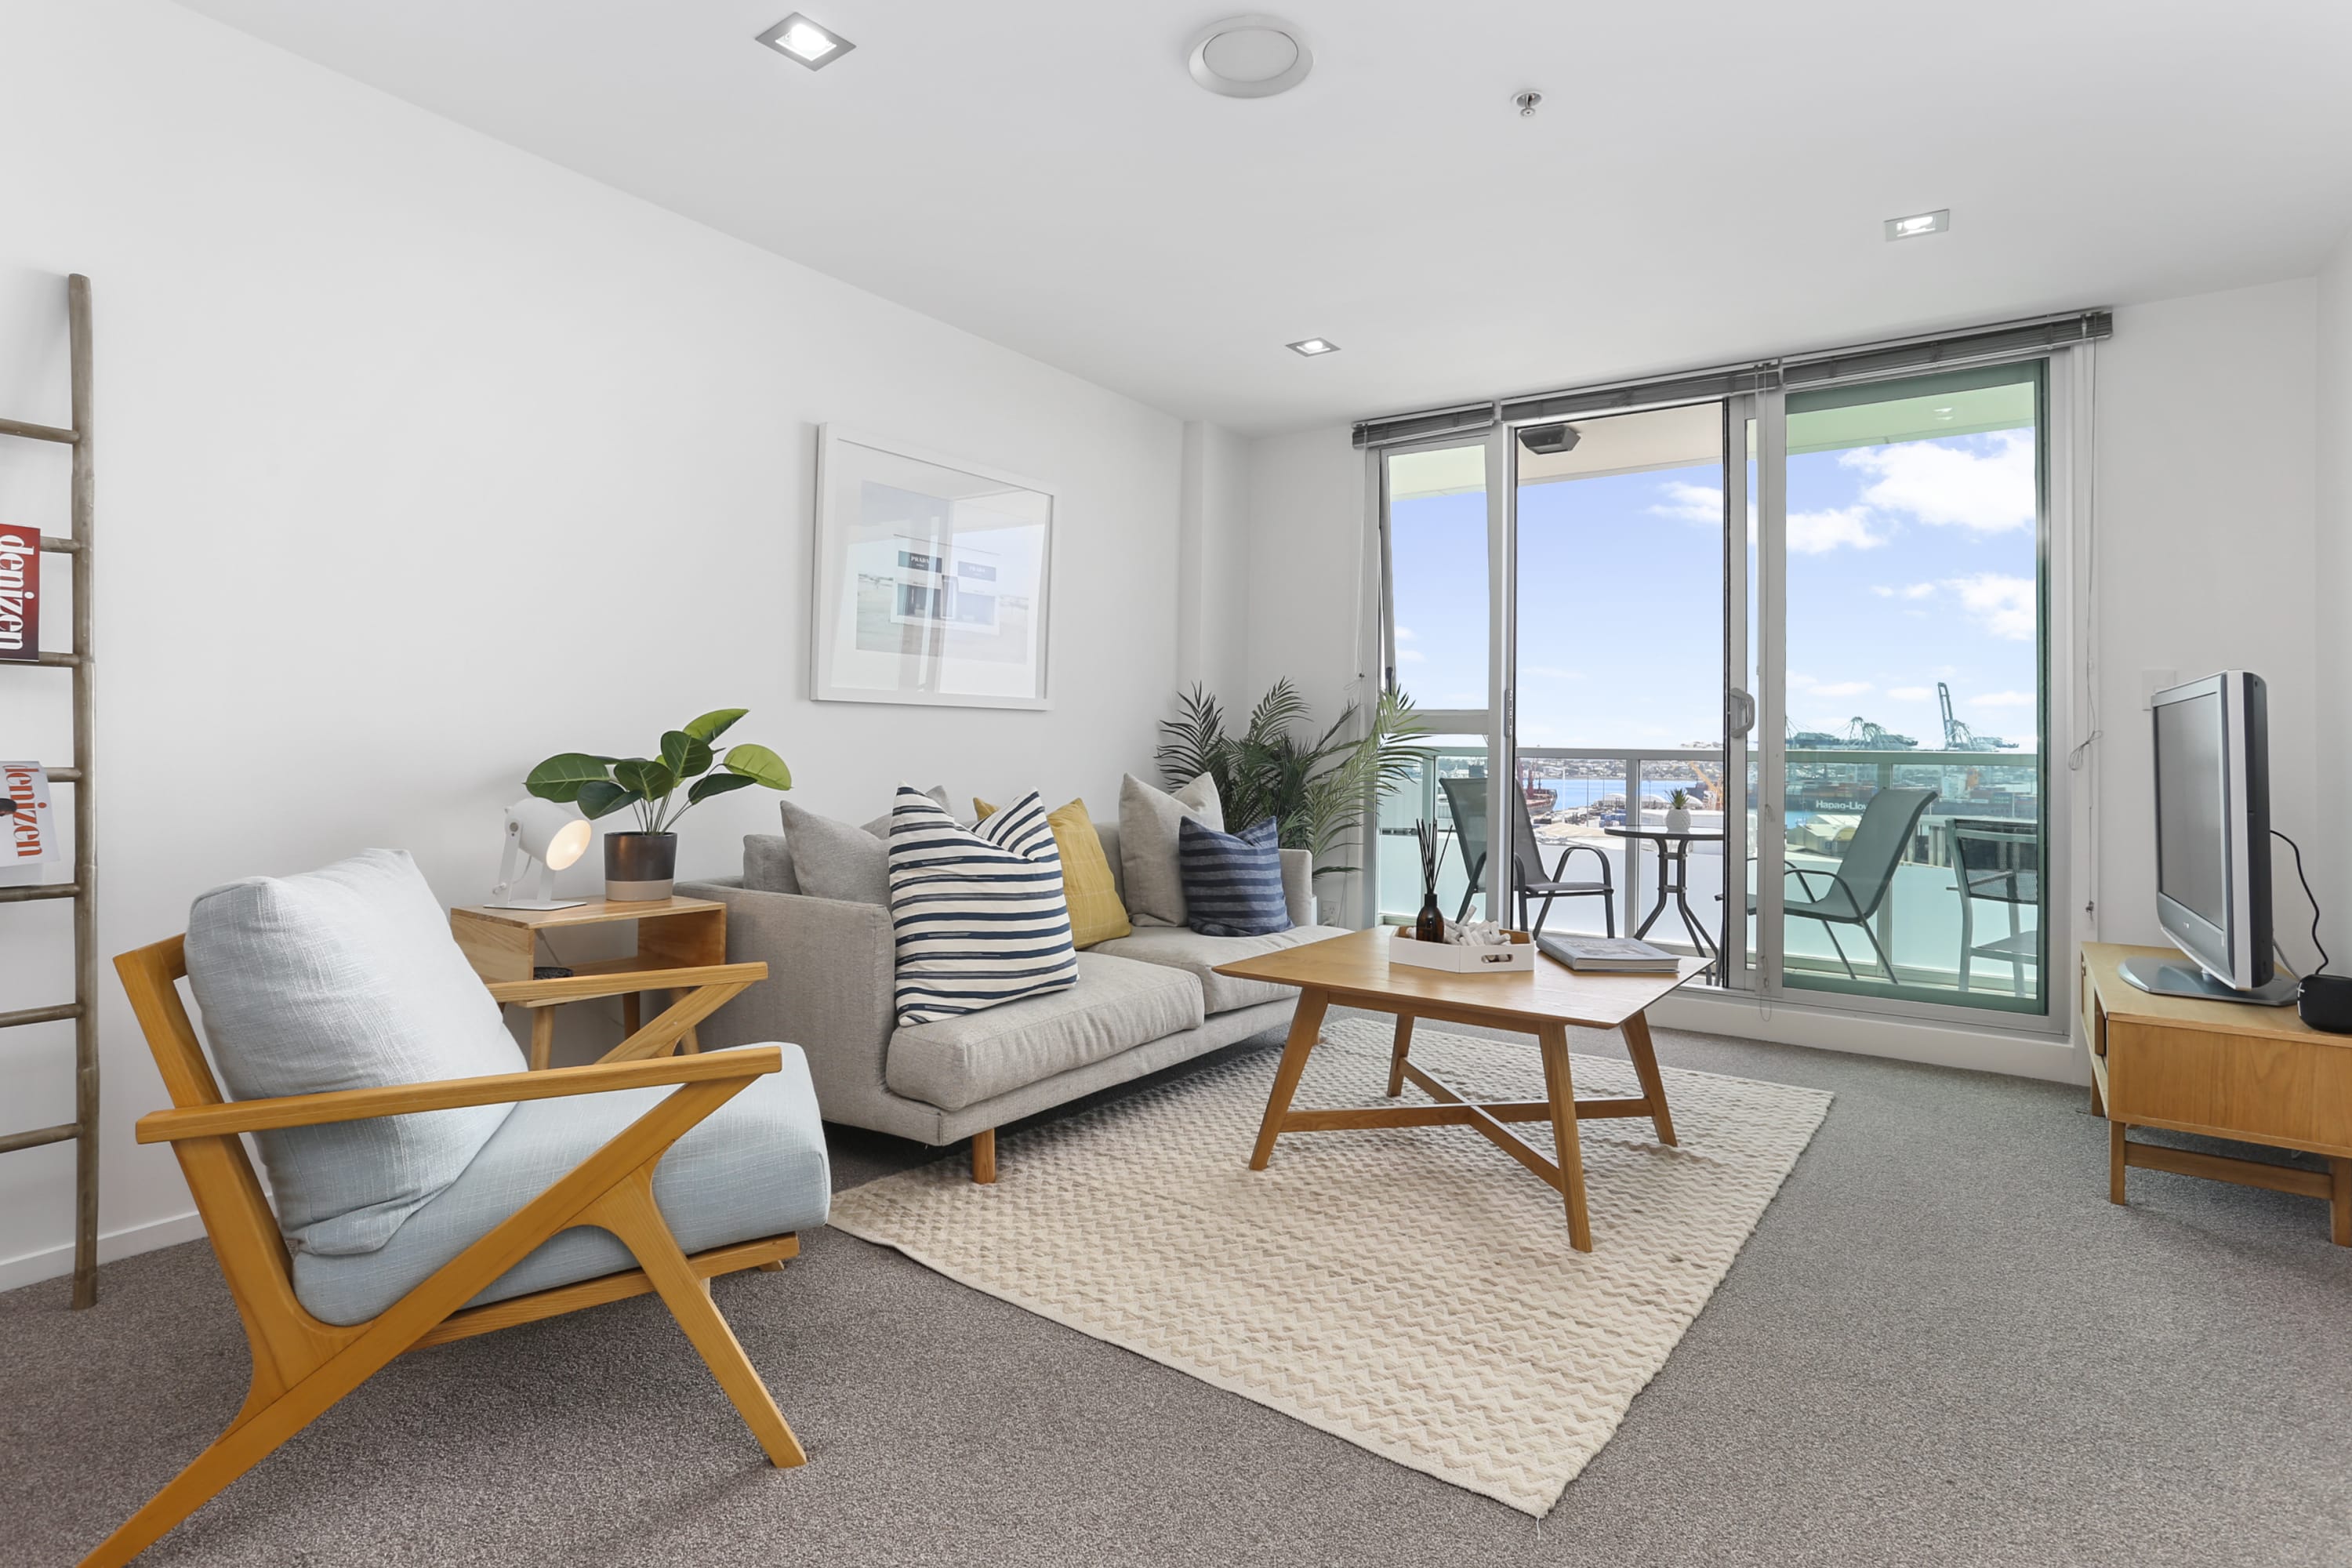 Apartment with Harbour Views near Spark Arena - Image 1